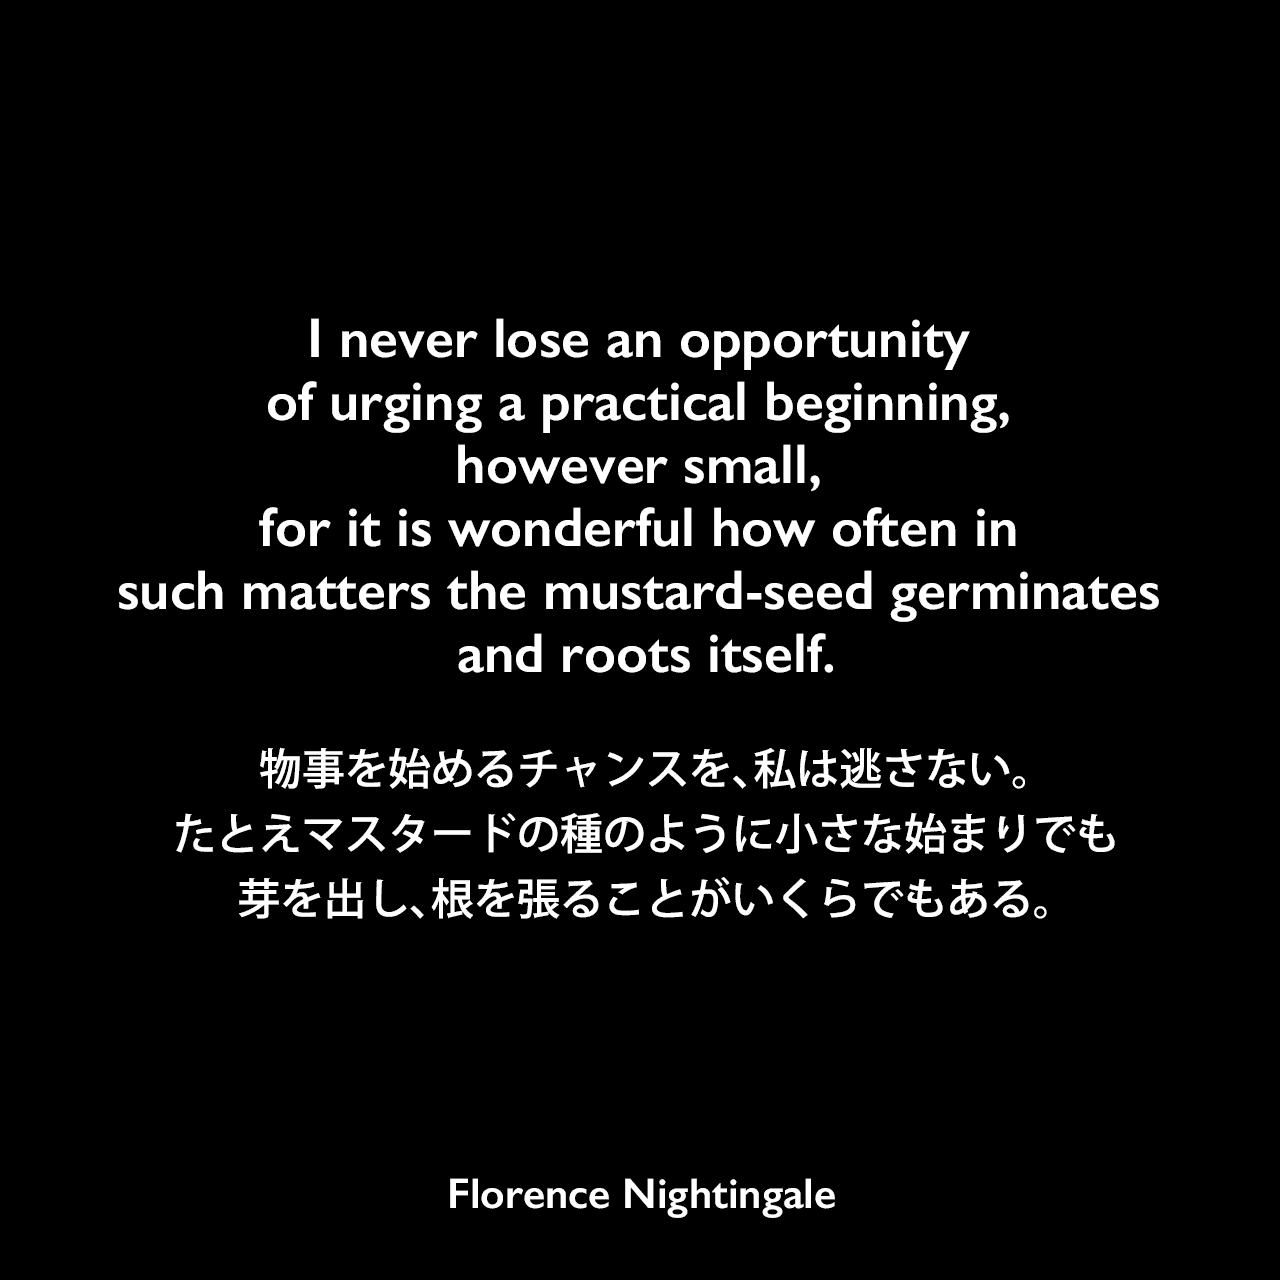 I never lose an opportunity of urging a practical beginning, however small, for it is wonderful how often in such matters the mustard-seed germinates and roots itself.物事を始めるチャンスを、私は逃さない。たとえマスタードの種のように小さな始まりでも、芽を出し、根を張ることがいくらでもある。- 友人に宛てた手紙よりFlorence Nightingale